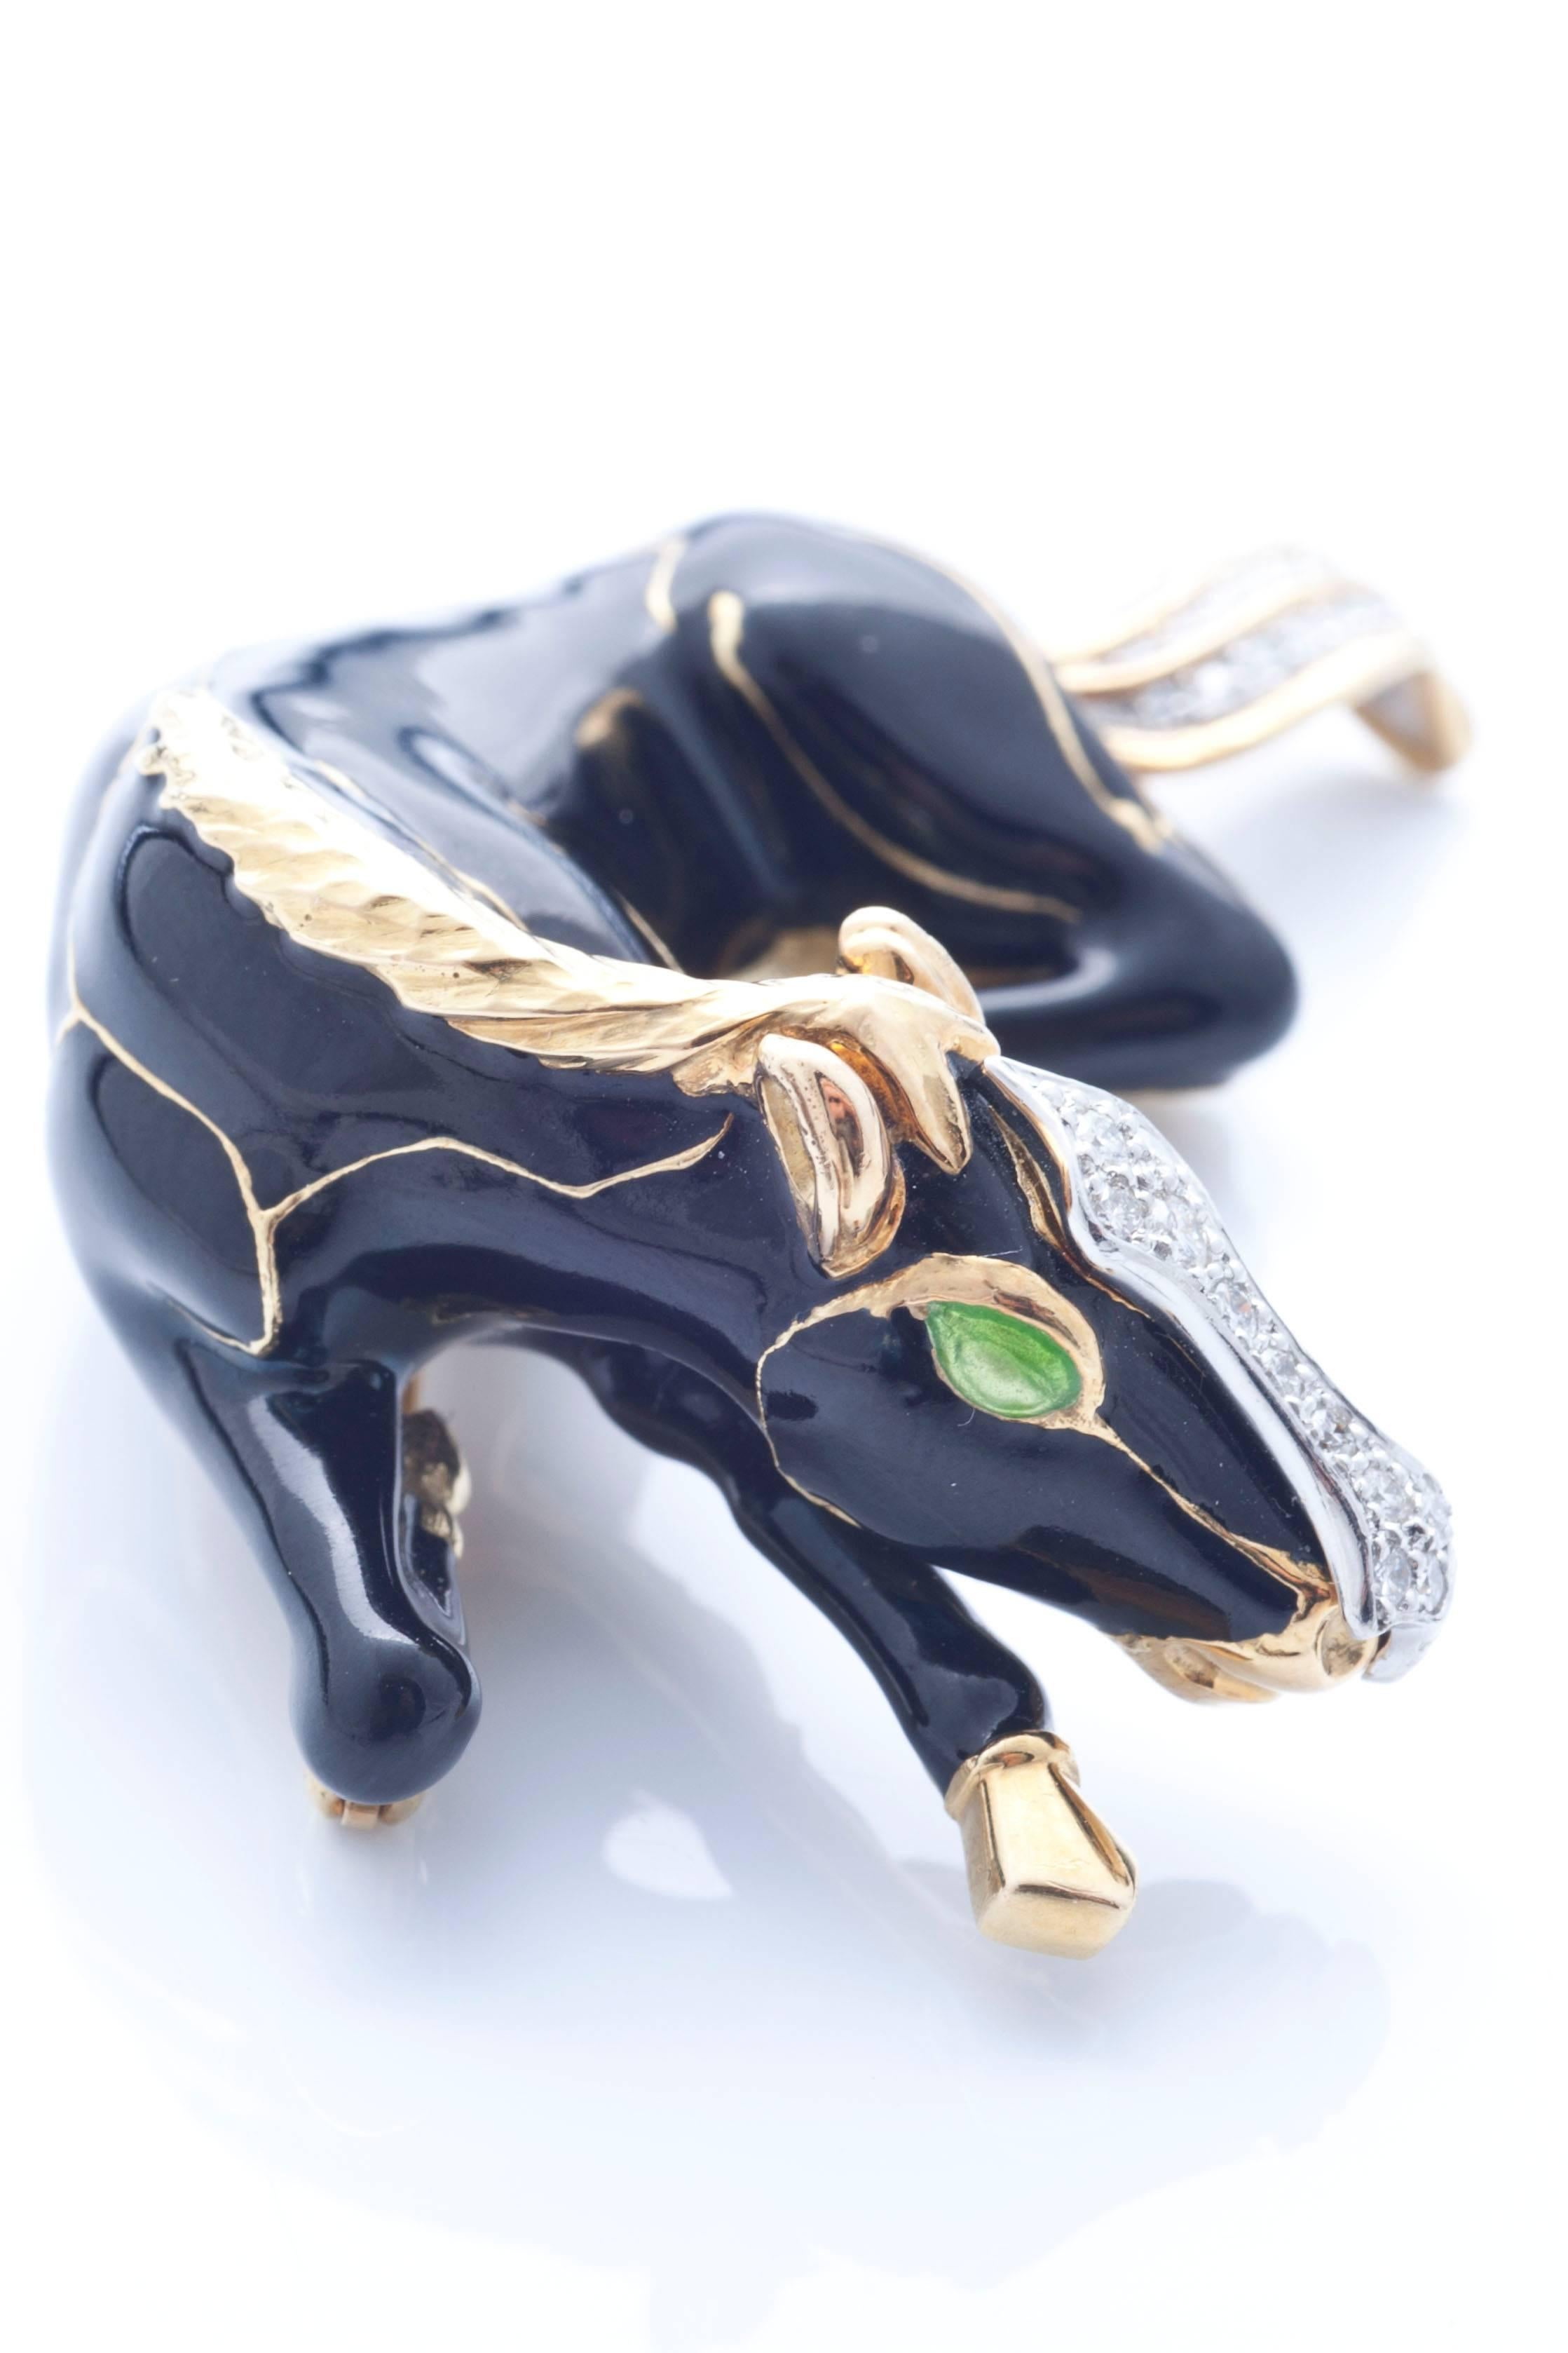 Black enamel horse with cabochon emeral eyes and circular-cut diamond nose and tail detail, mounted in platinum and 18k yellow gold brooch. Signed Webb
